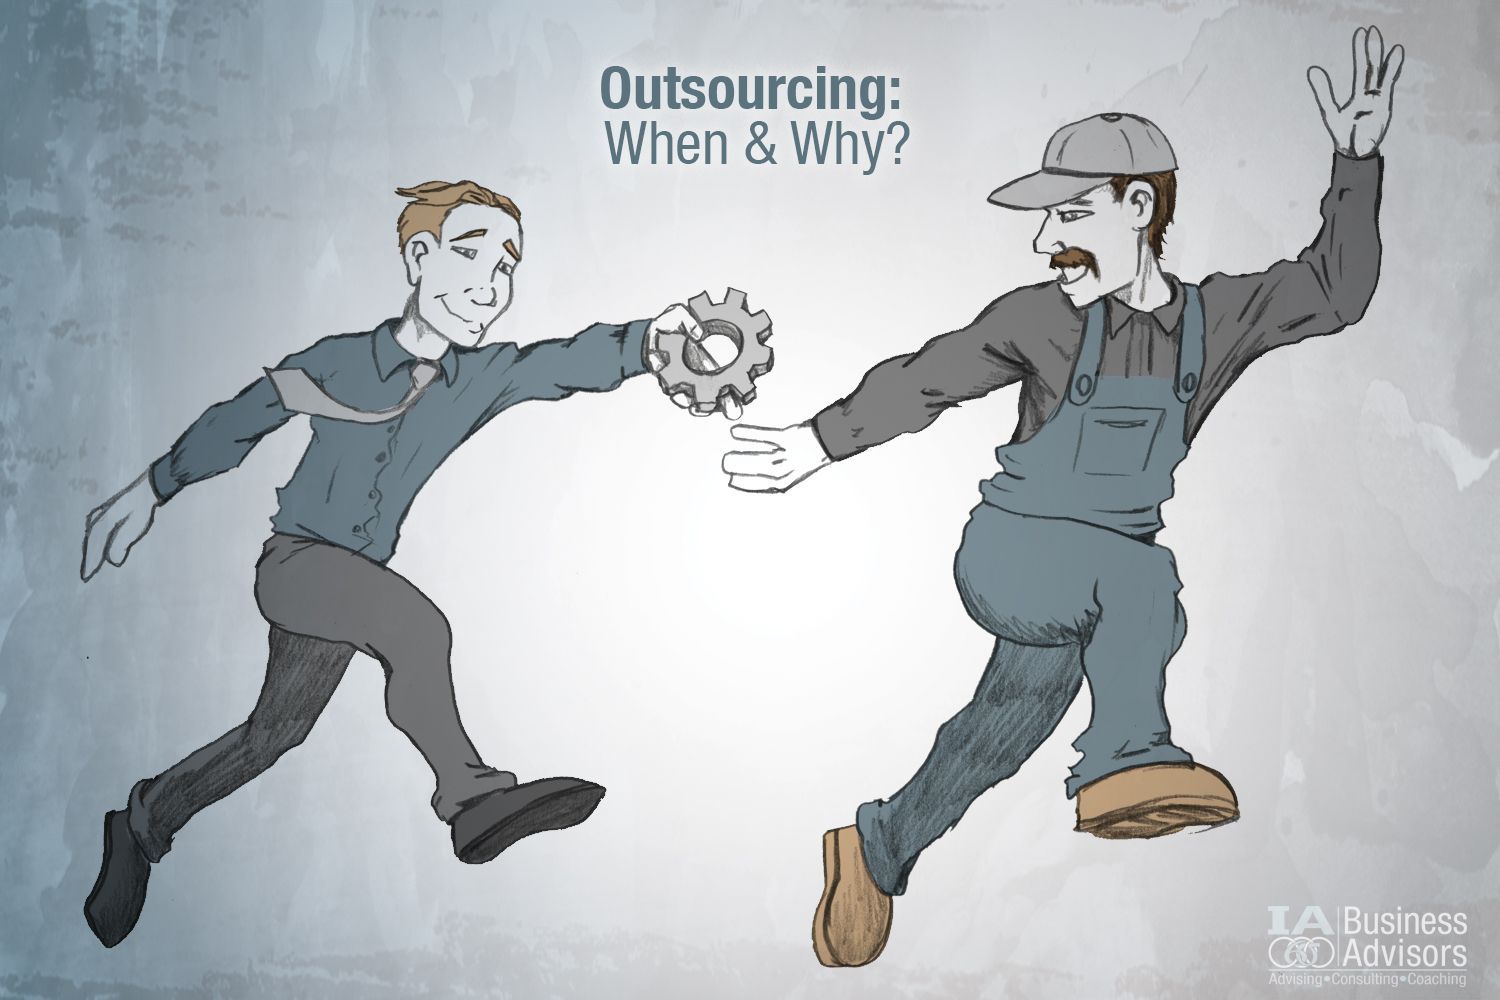 Outsourcing: When & Why?